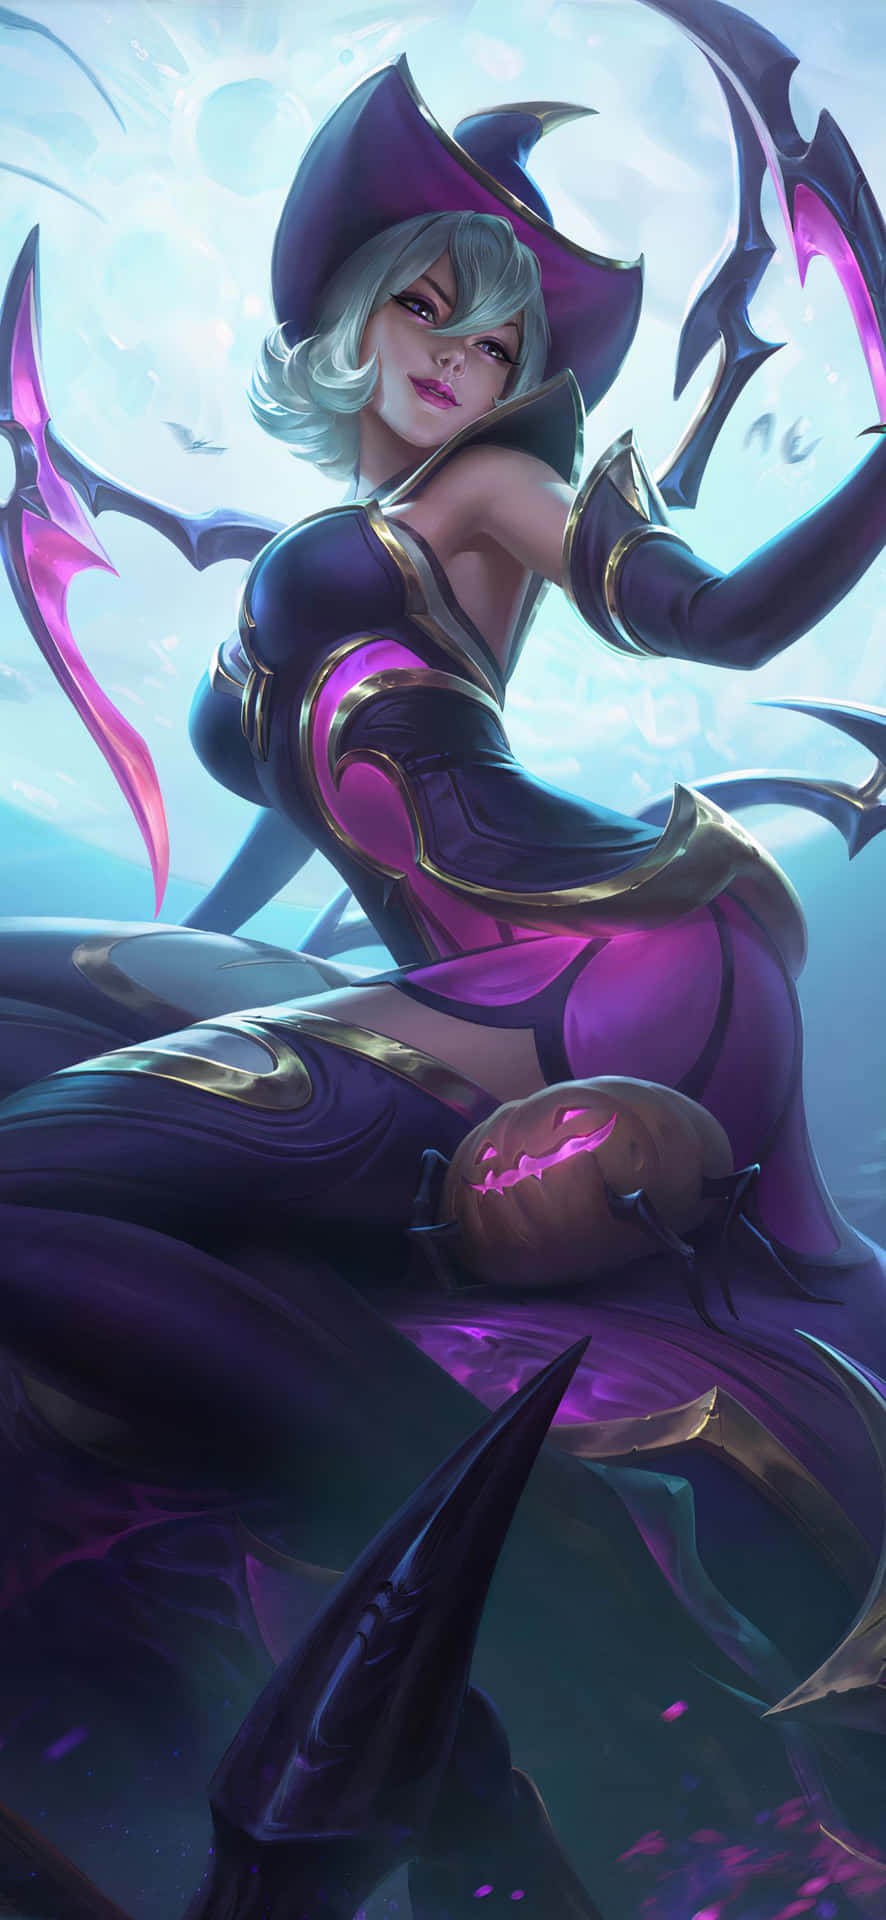 A Female Character In A Purple Dress And Purple Wings